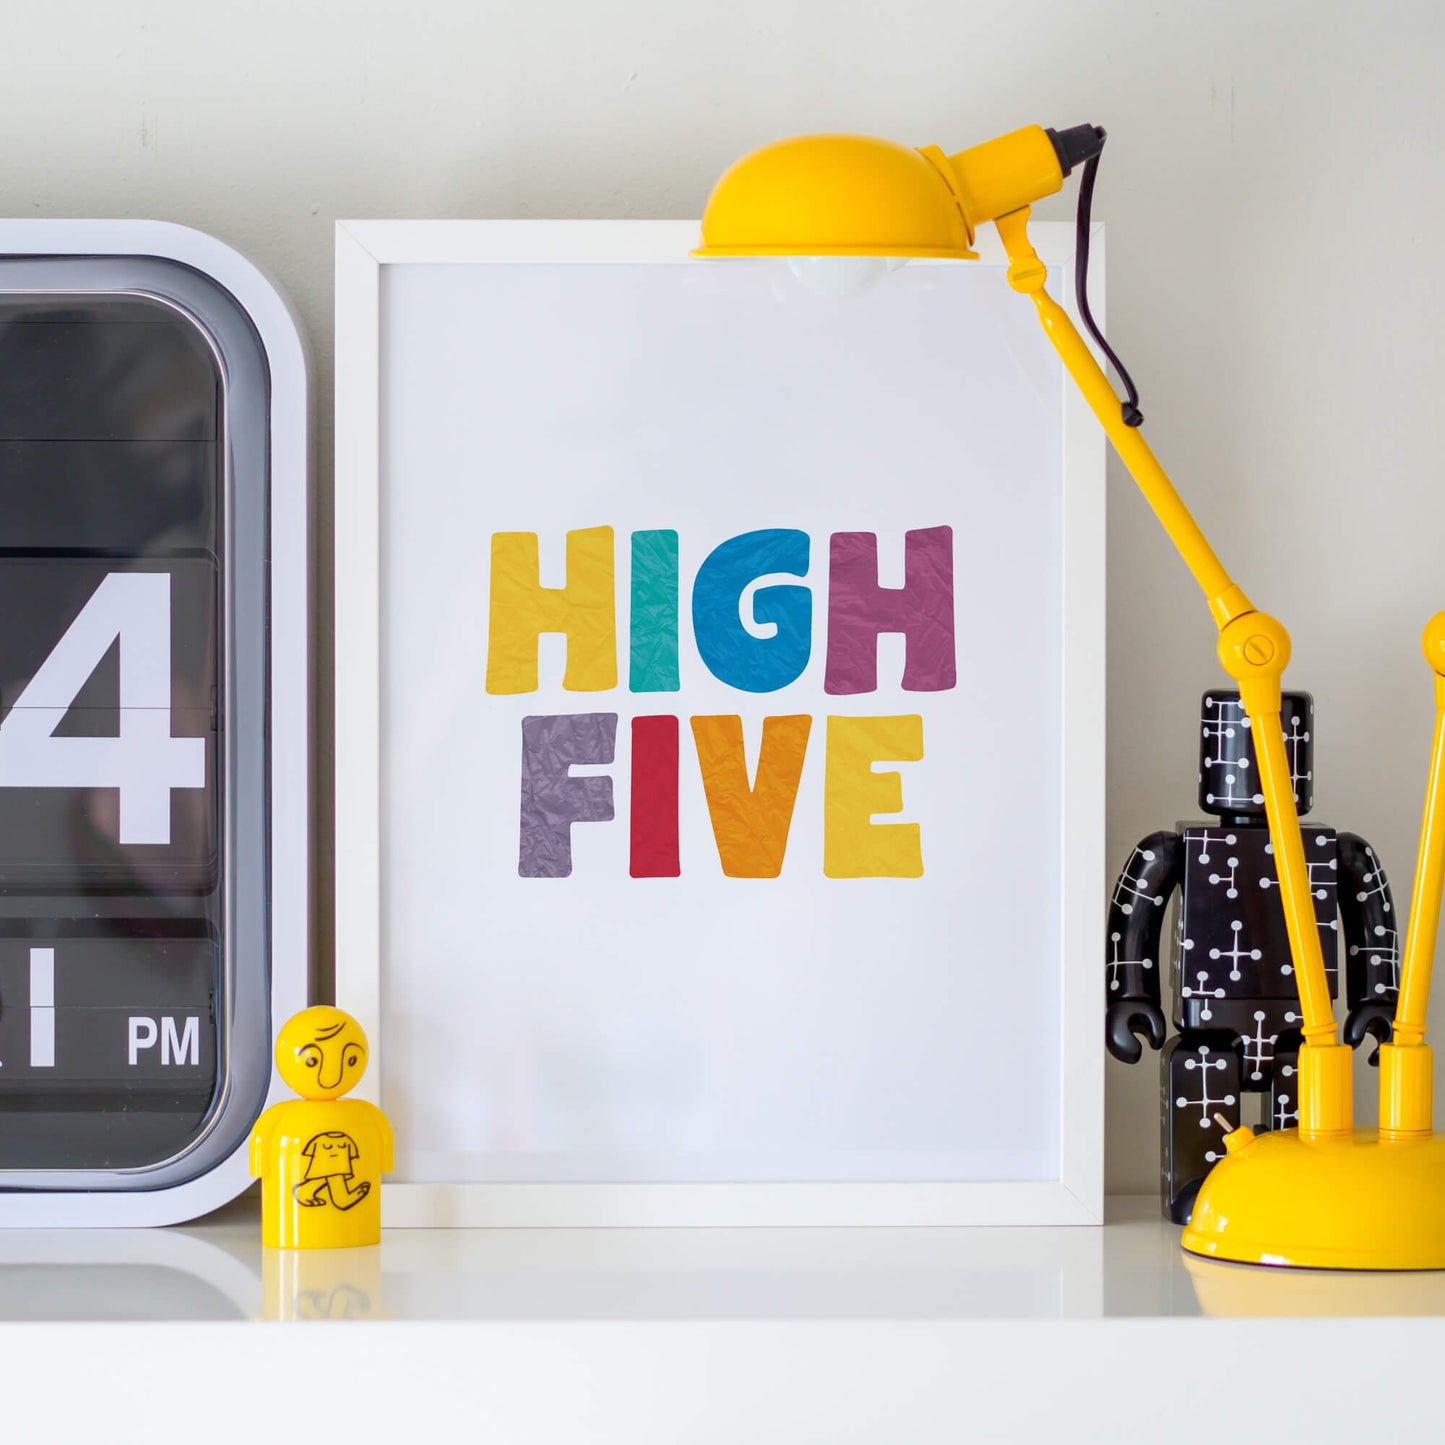 Colourful High Five Poster by SixElevenCreations. Product Code SEP0510